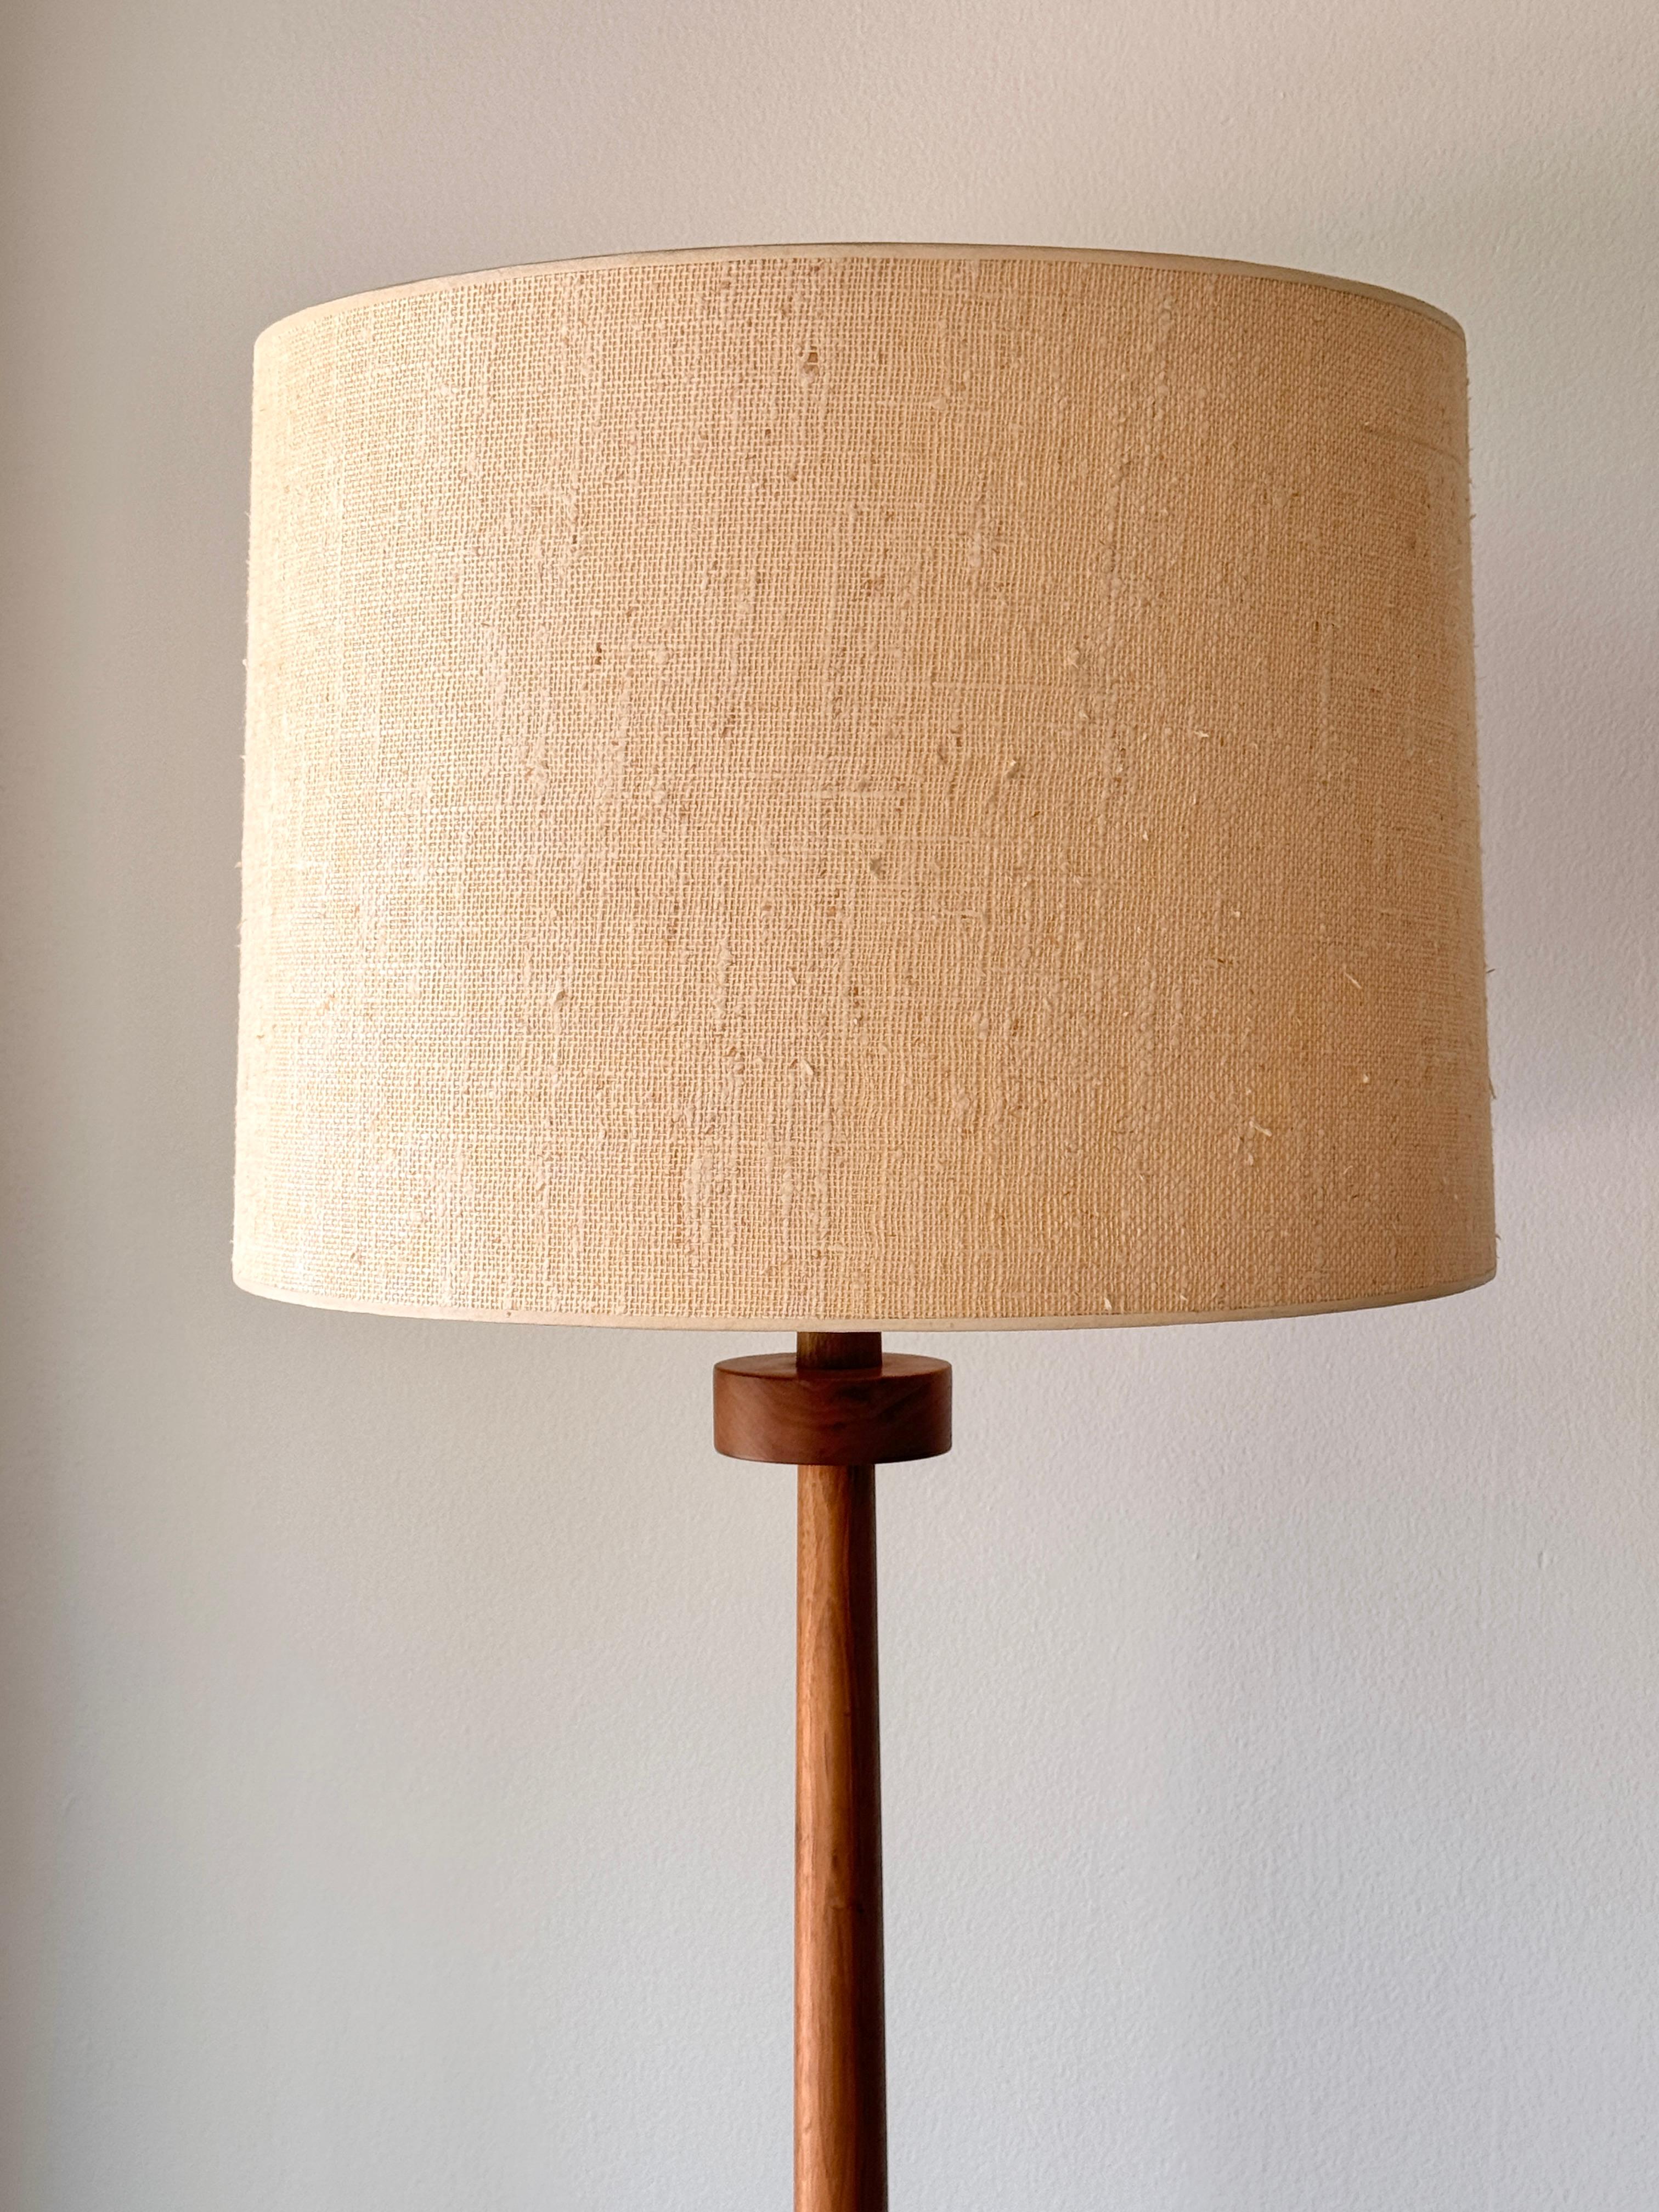 Rare Gordon and Jane Martz Walnut Floor Lamp With Ceramic Base and Mosaic Table For Sale 7